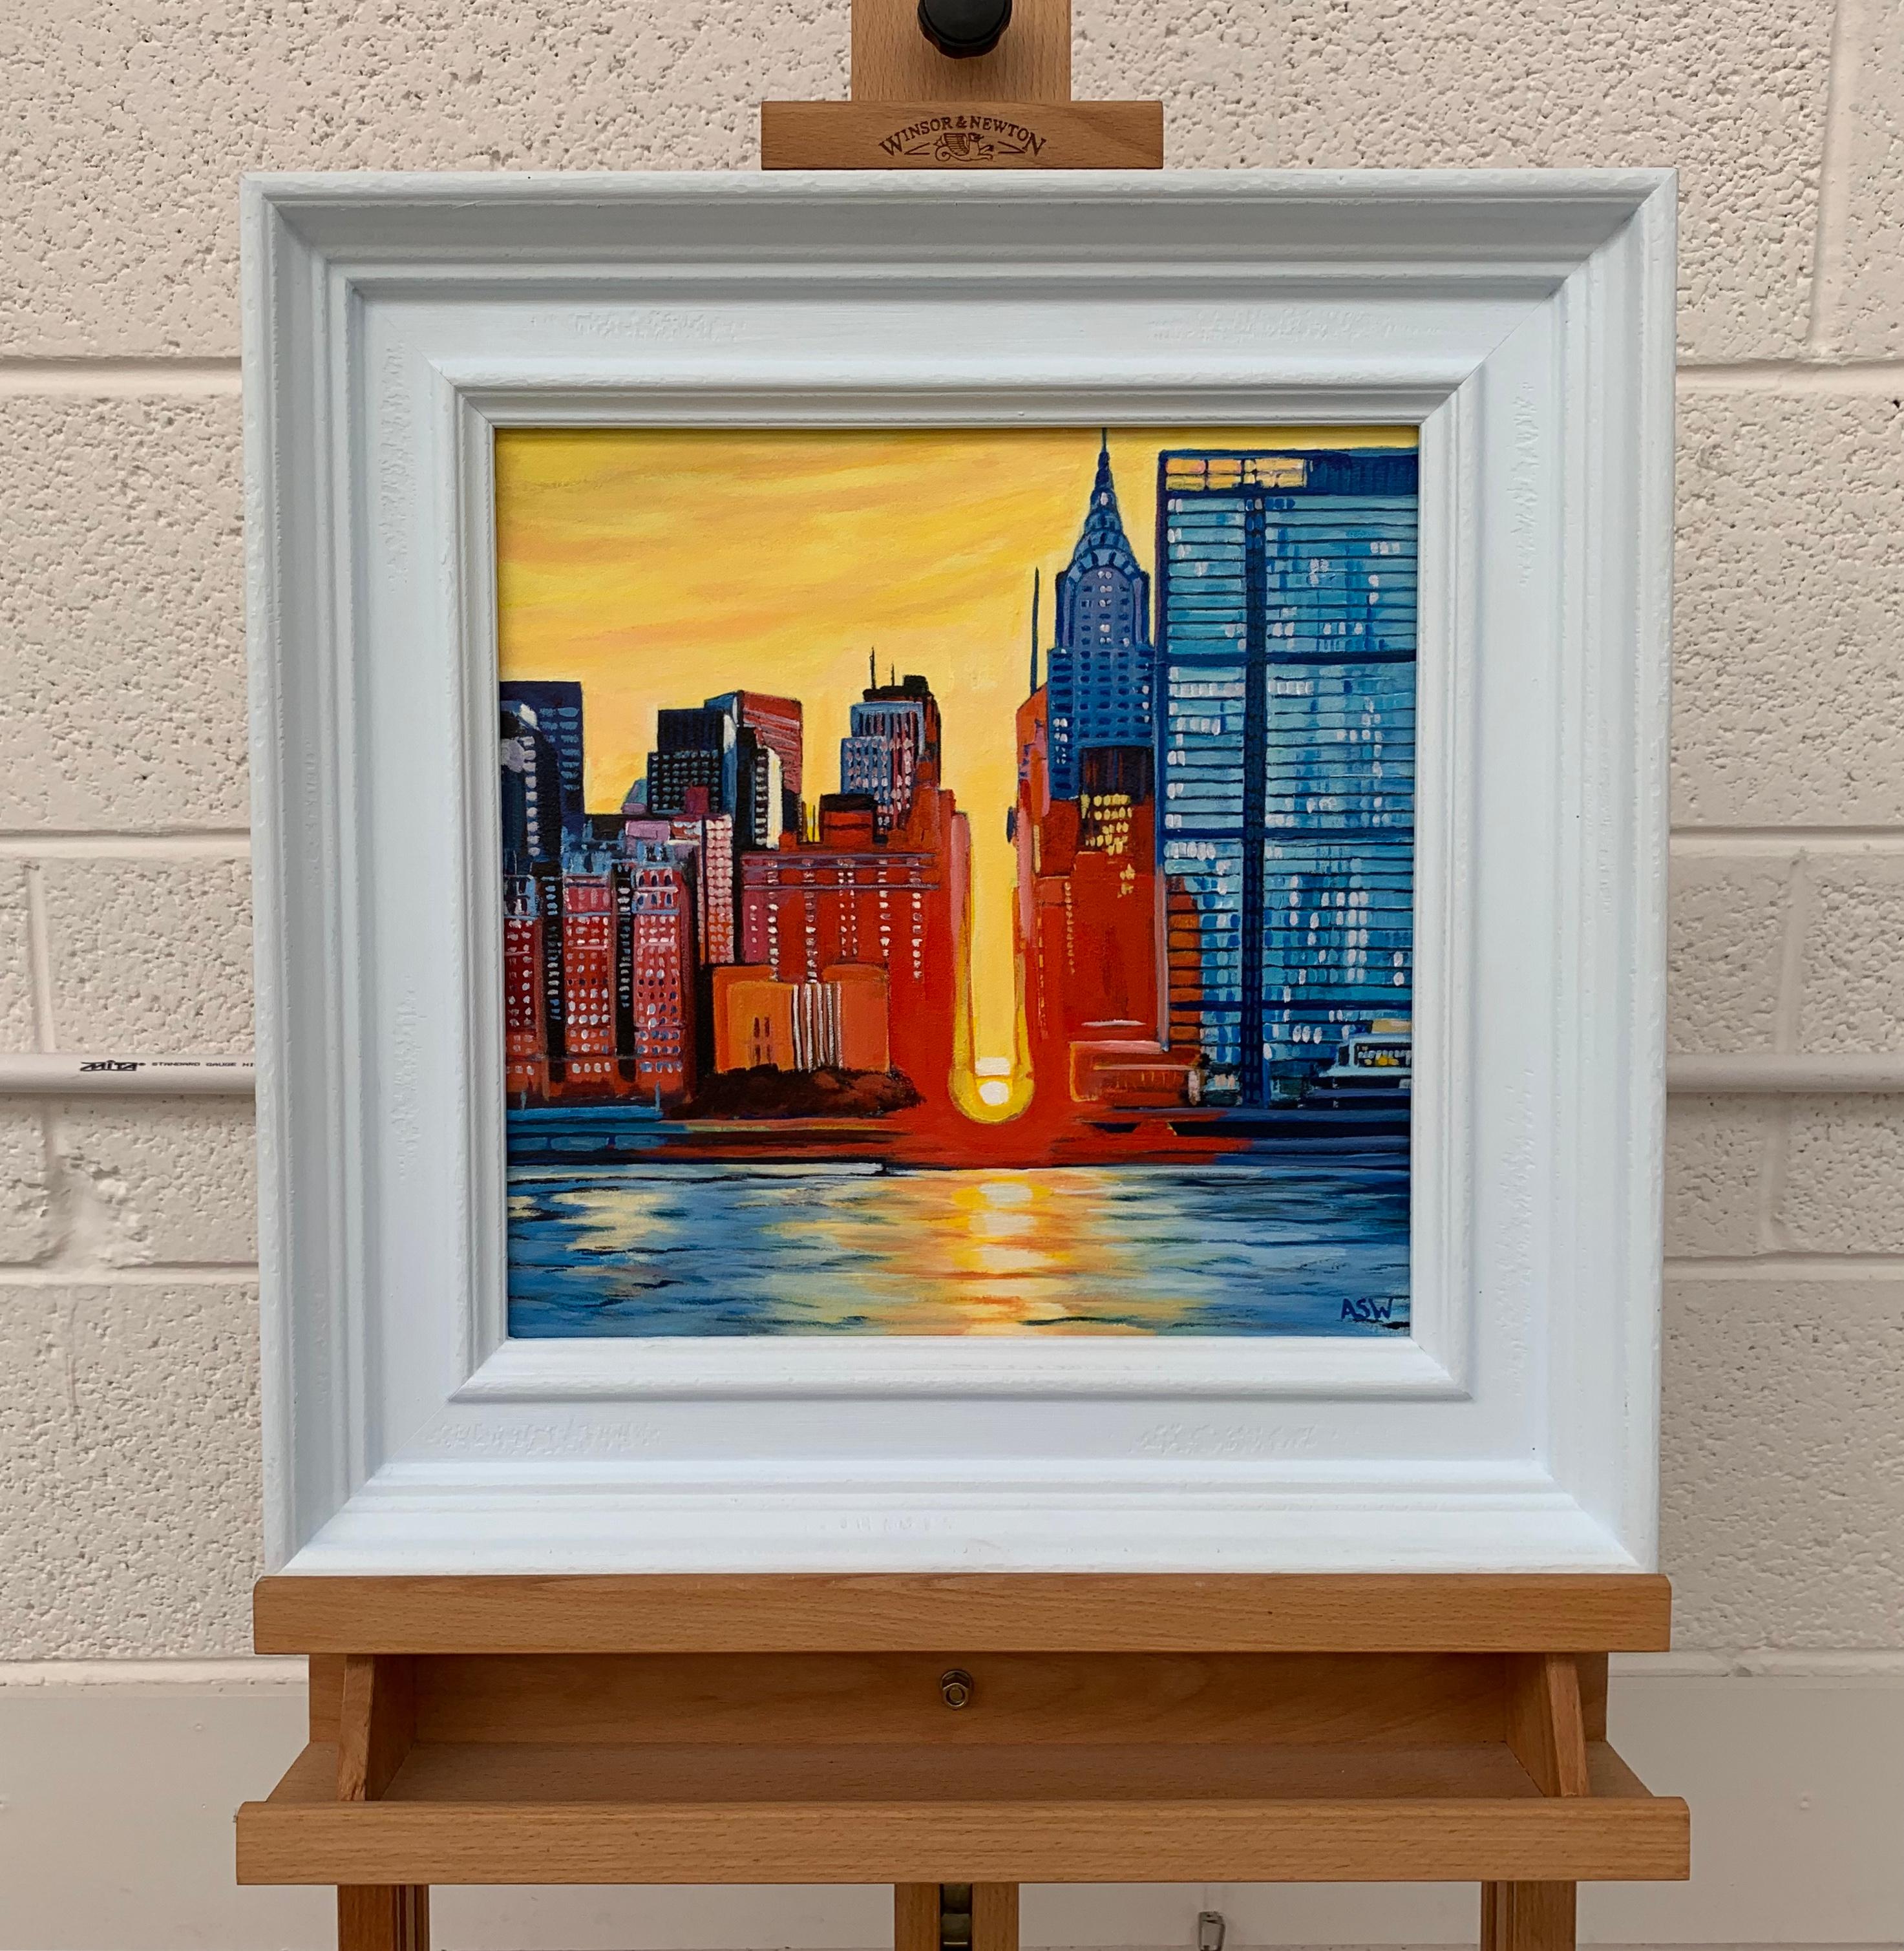 Contemporary Realism of New York City USA Sunset by Collectible British Artist - Impressionist Painting by Angela Wakefield